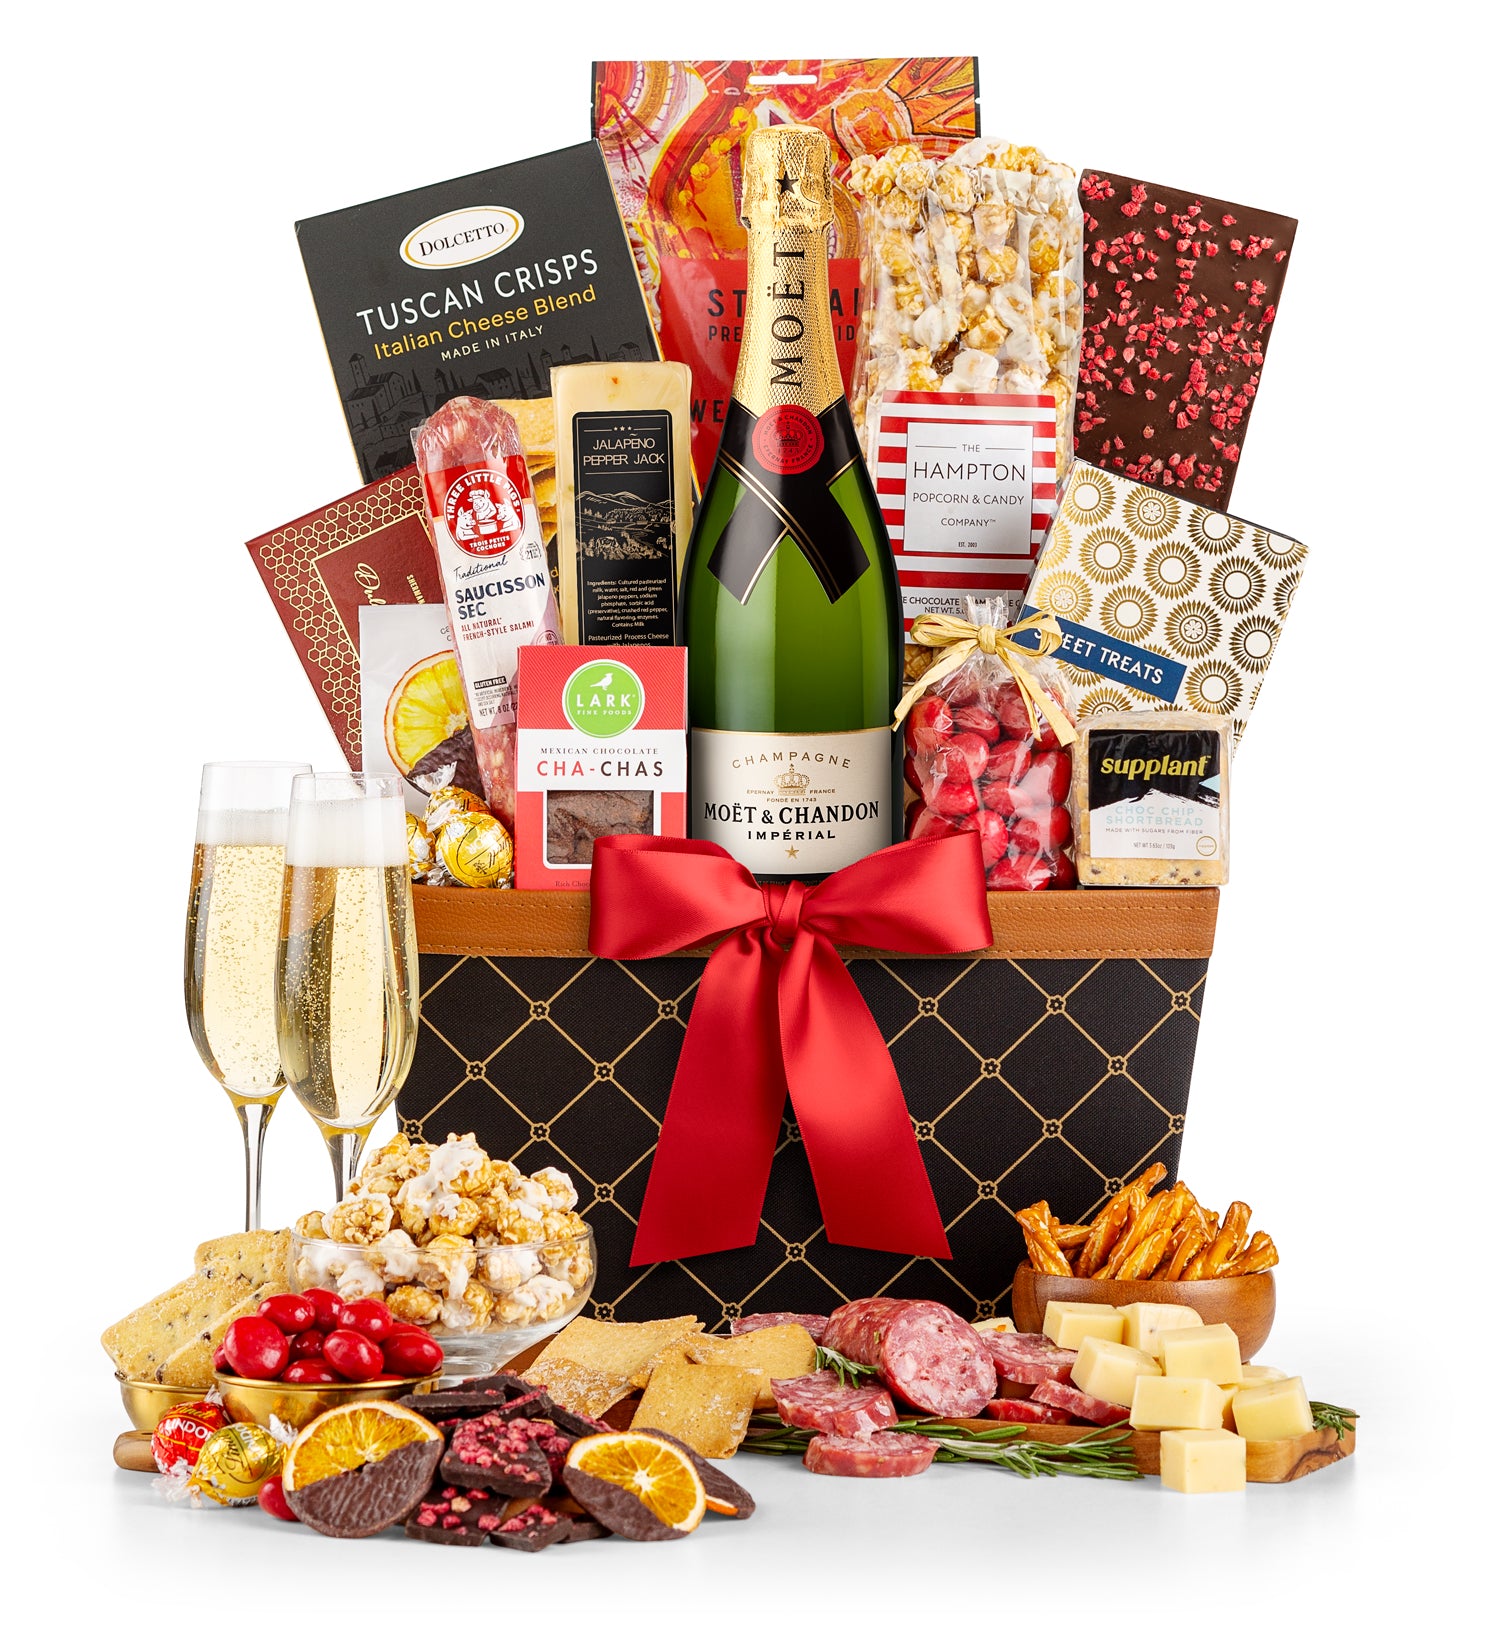 Moet & Chandon Rose Imperial with Christmas Cracker Box, Champagne